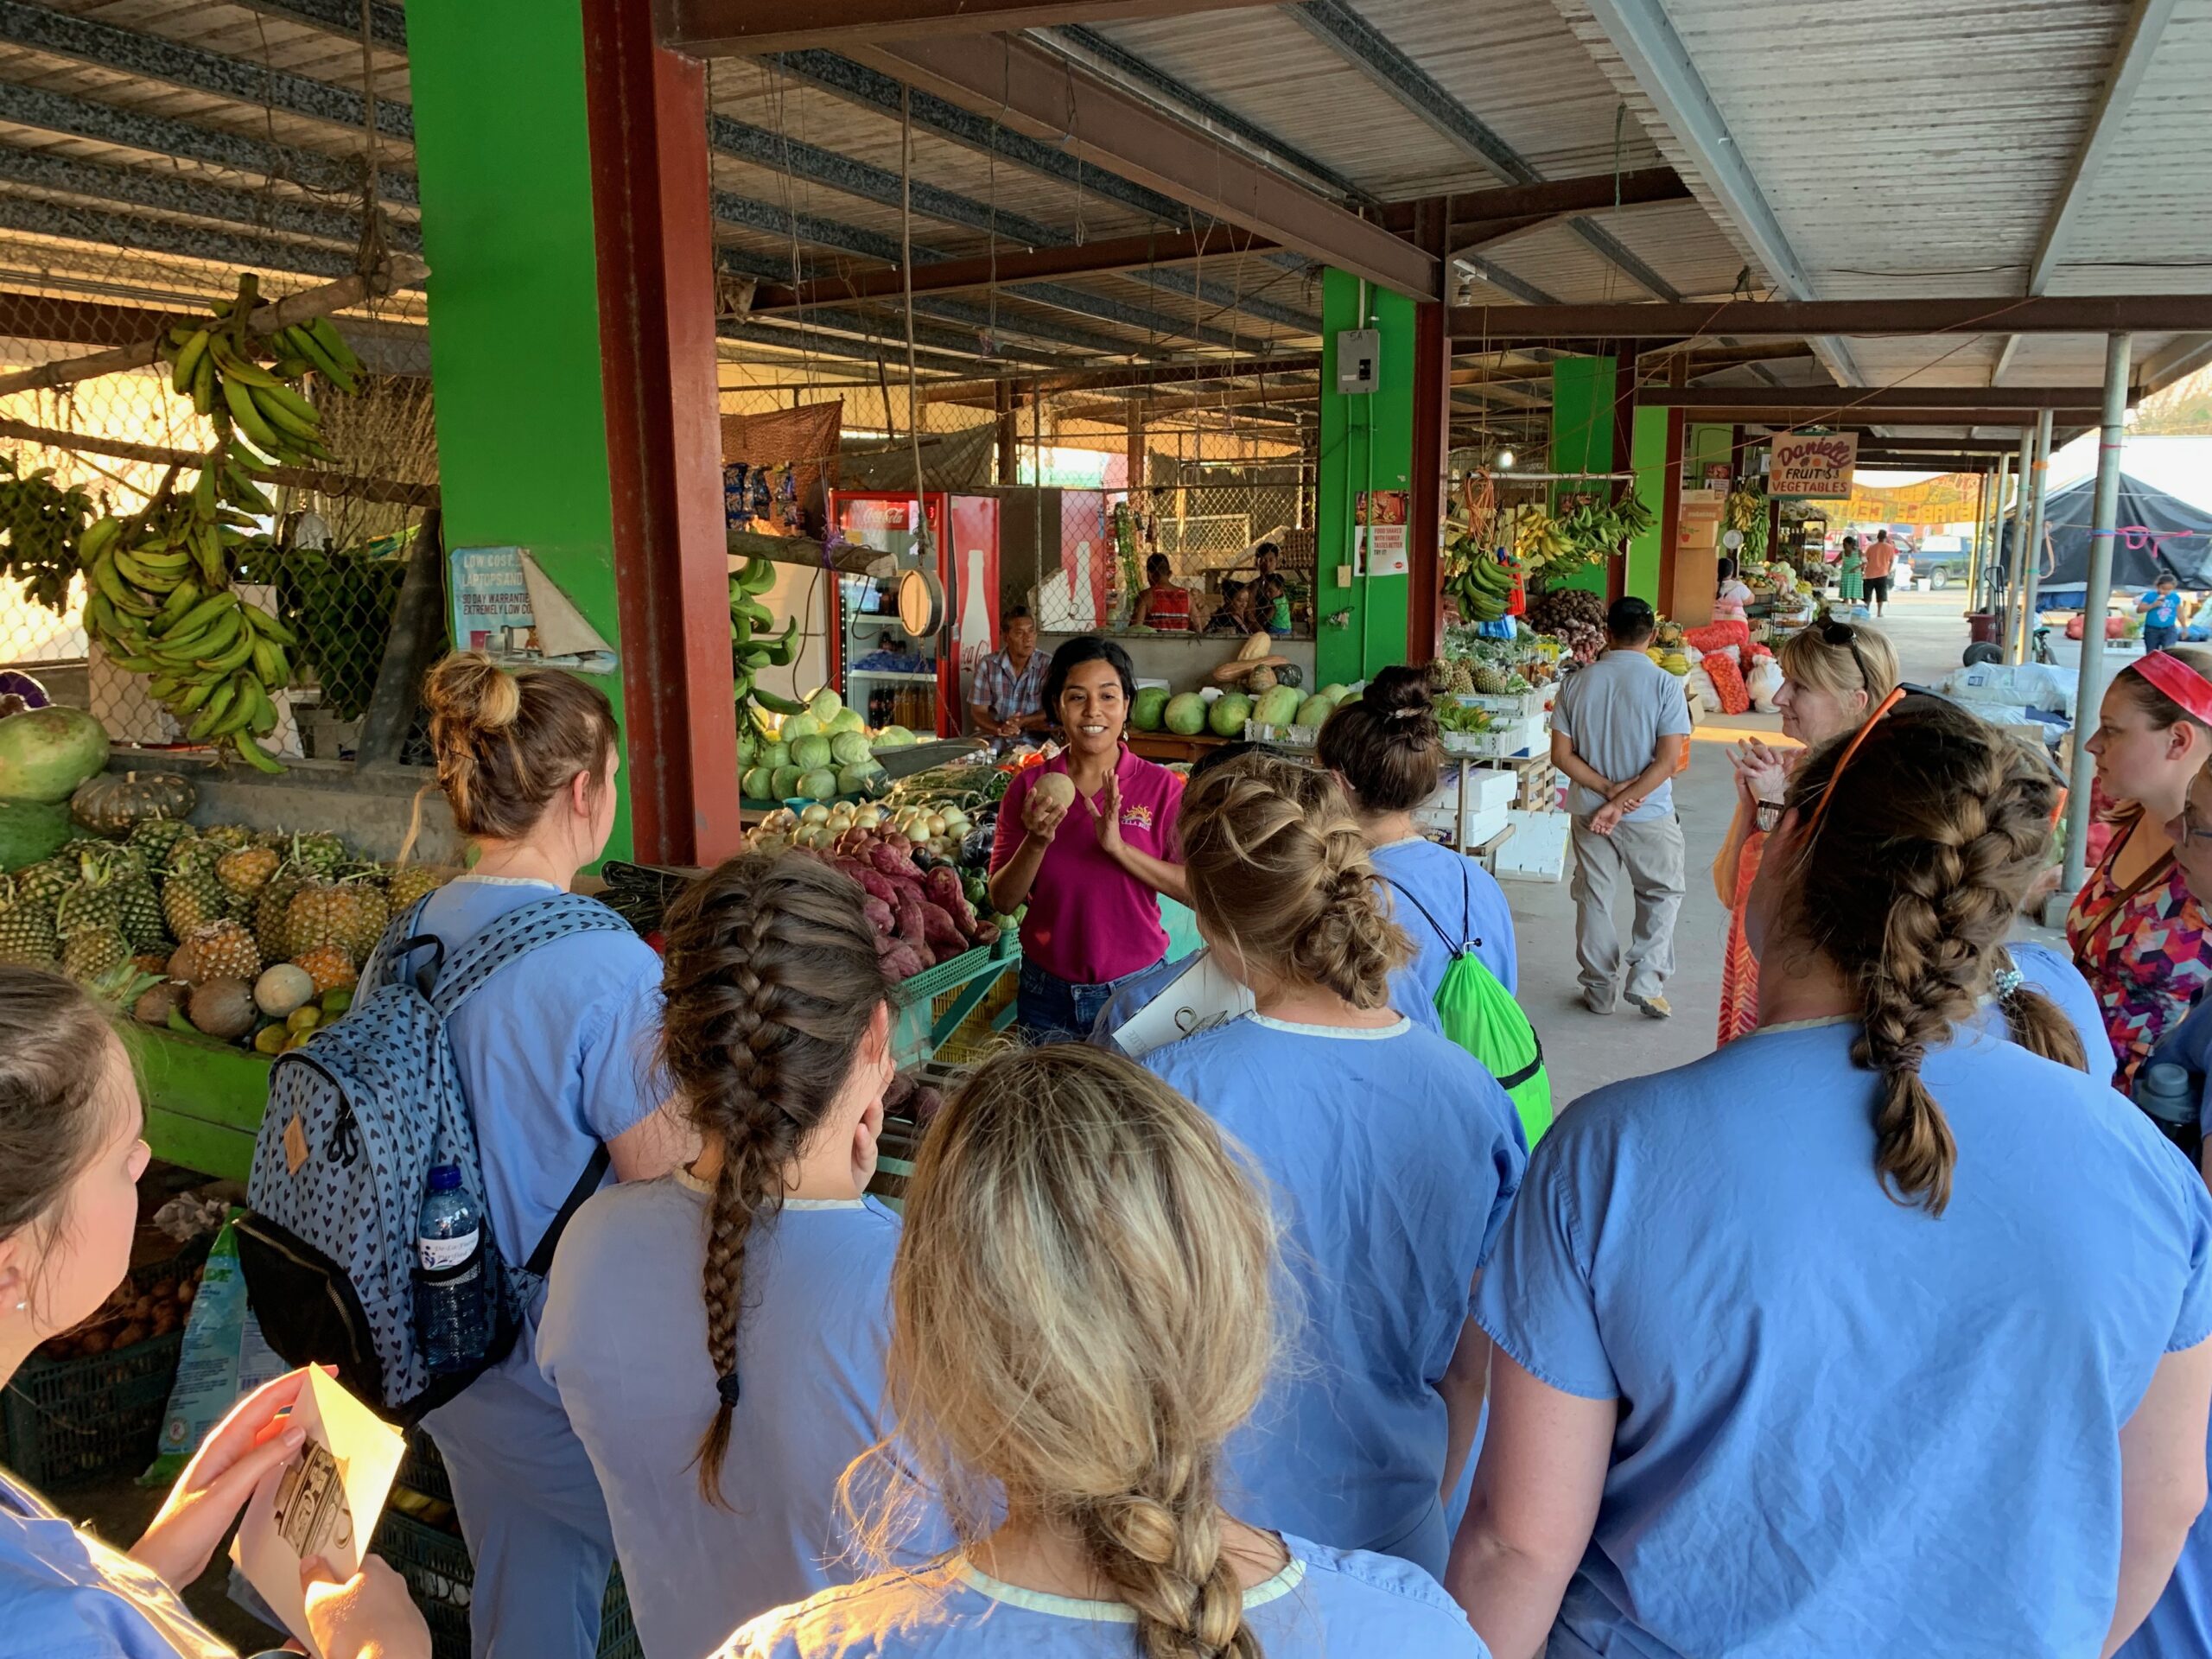 Group of nursing students in an outdoor market